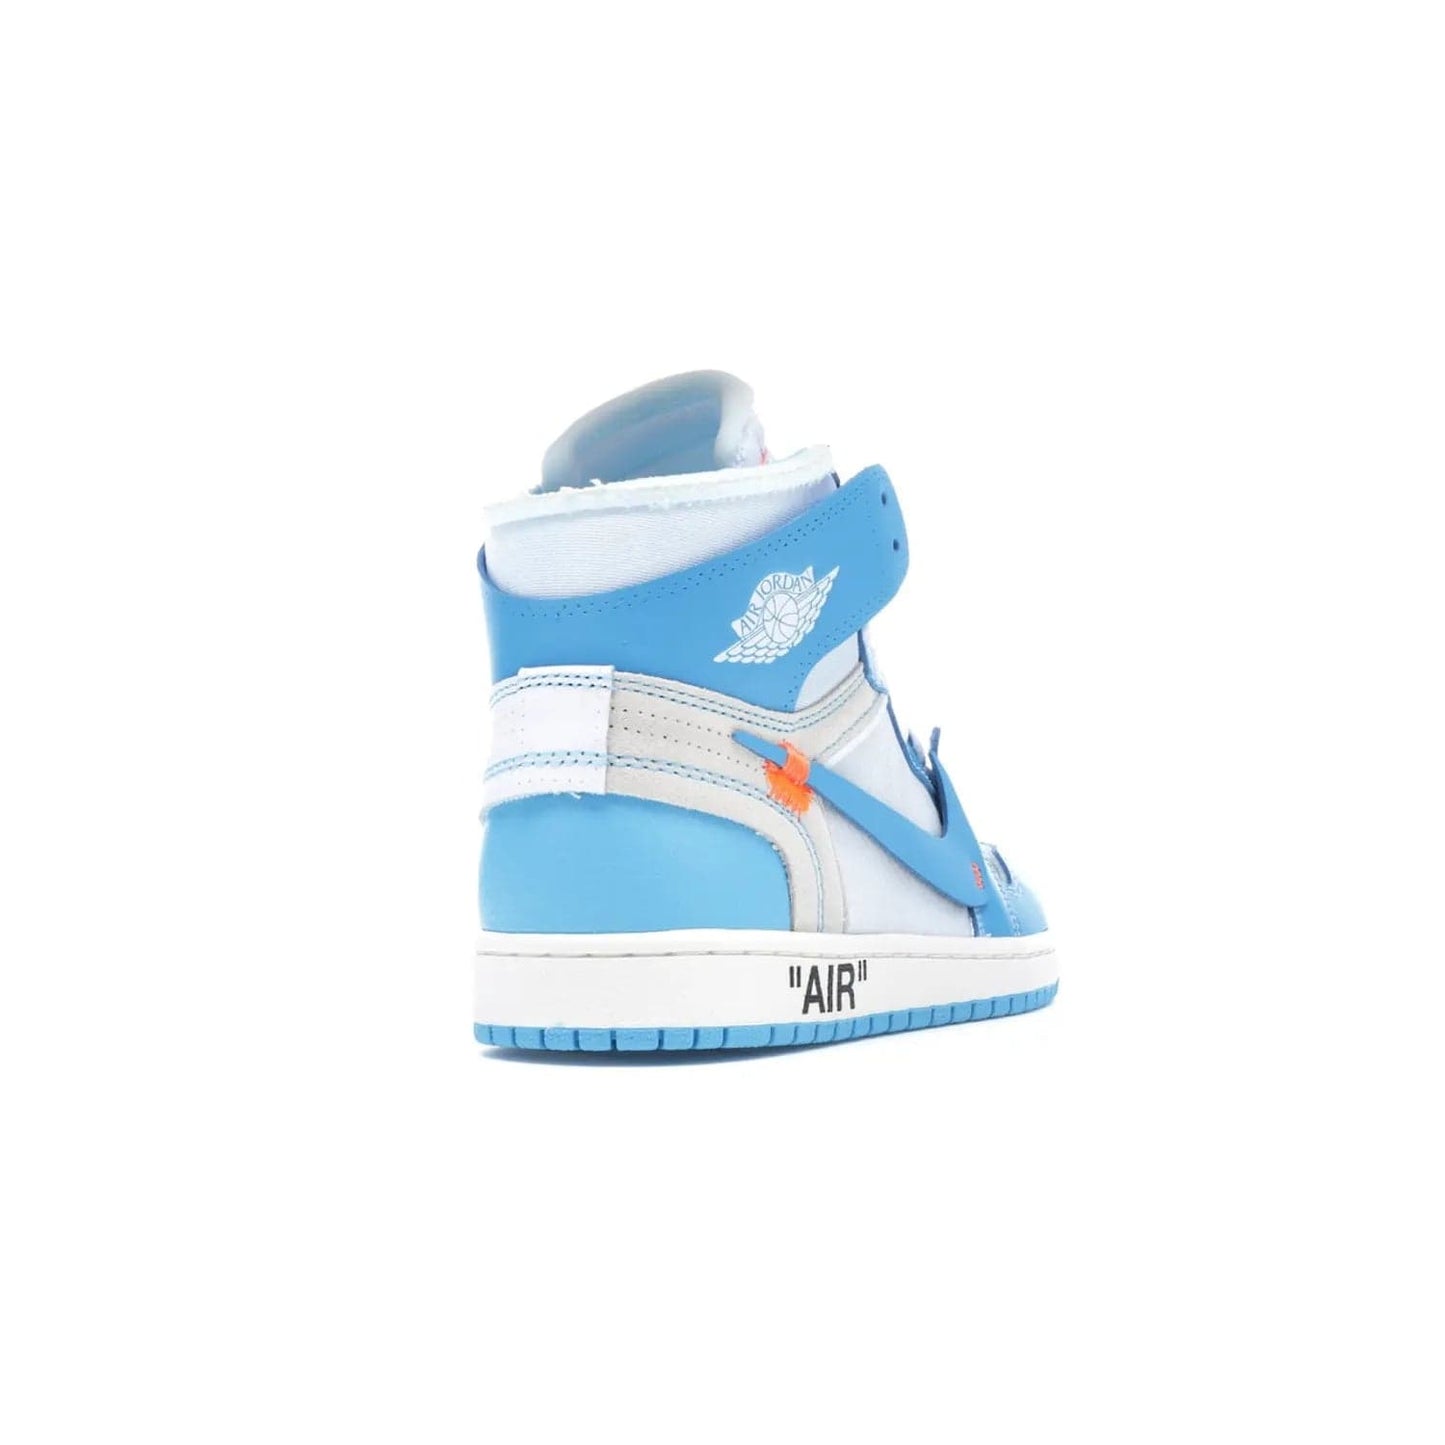 Jordan 1 Retro High Off-White University Blue - Image 31 - Only at www.BallersClubKickz.com - Classic Jordan 1 Retro High "Off-White UNC" sneakers meld style and comfort. Boasting deconstructed white and blue leather, Off-White detailing, and a white, dark powder blue and cone colorway, these sneakers are perfect for dressing up or down. Get the iconic Off-White Jordan 1's and upgrade your look.